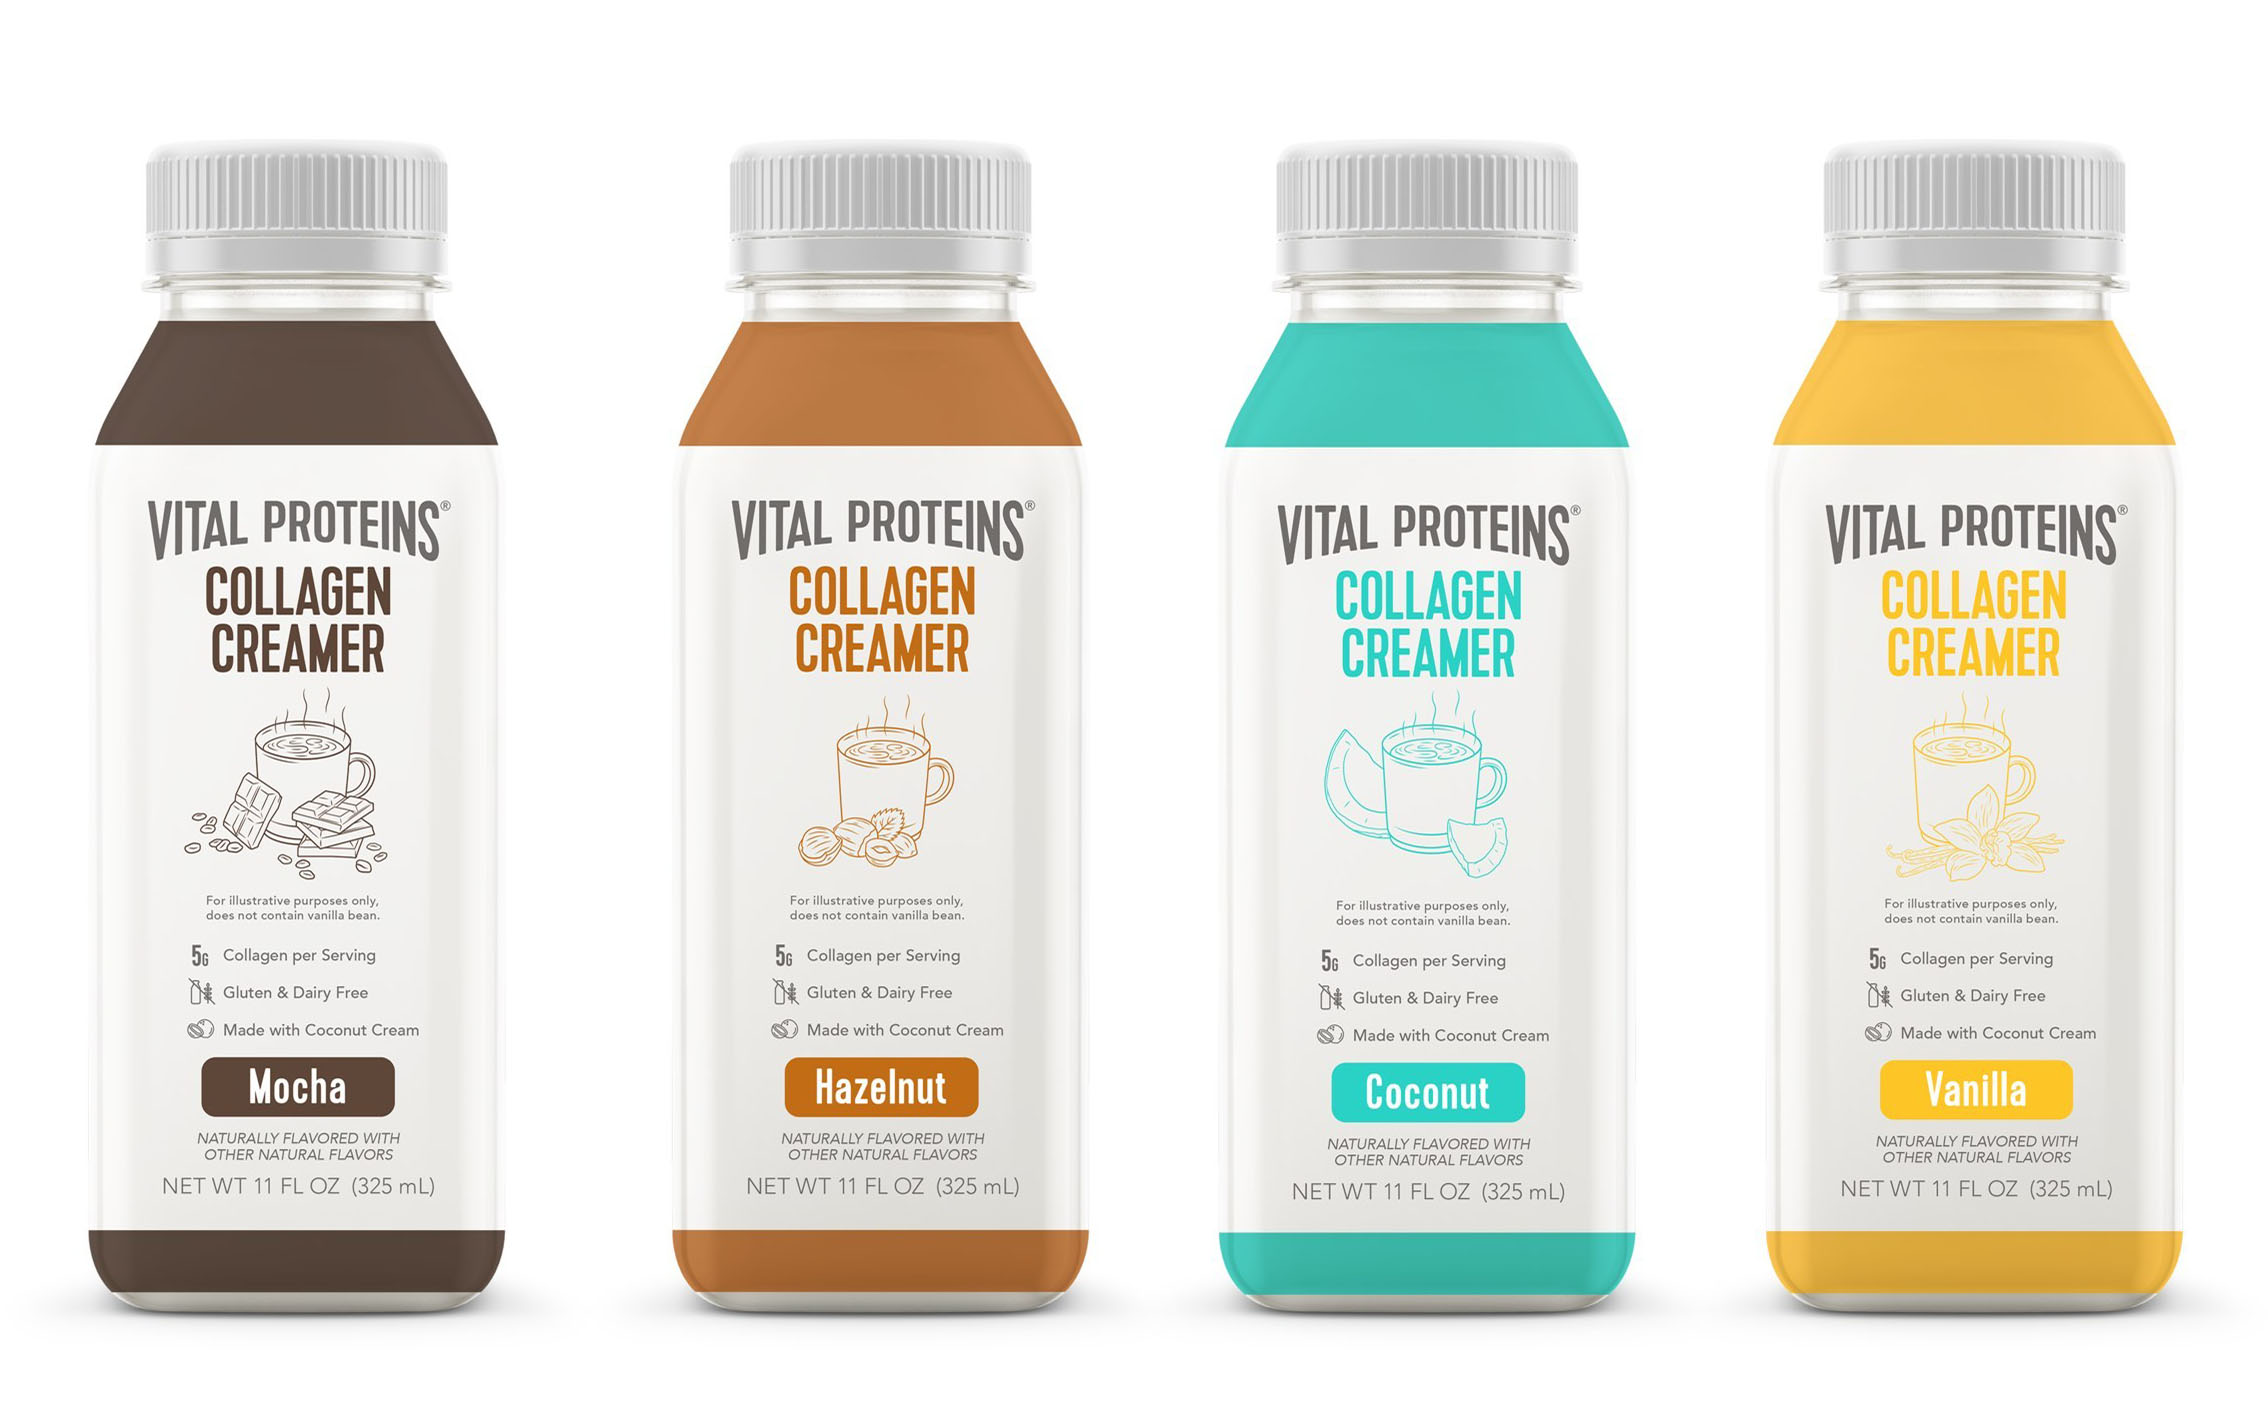 Vital Proteins Launch Range Of Liquid Collagen Creamers Foodbev Media,How To Make An Envelope With Paper